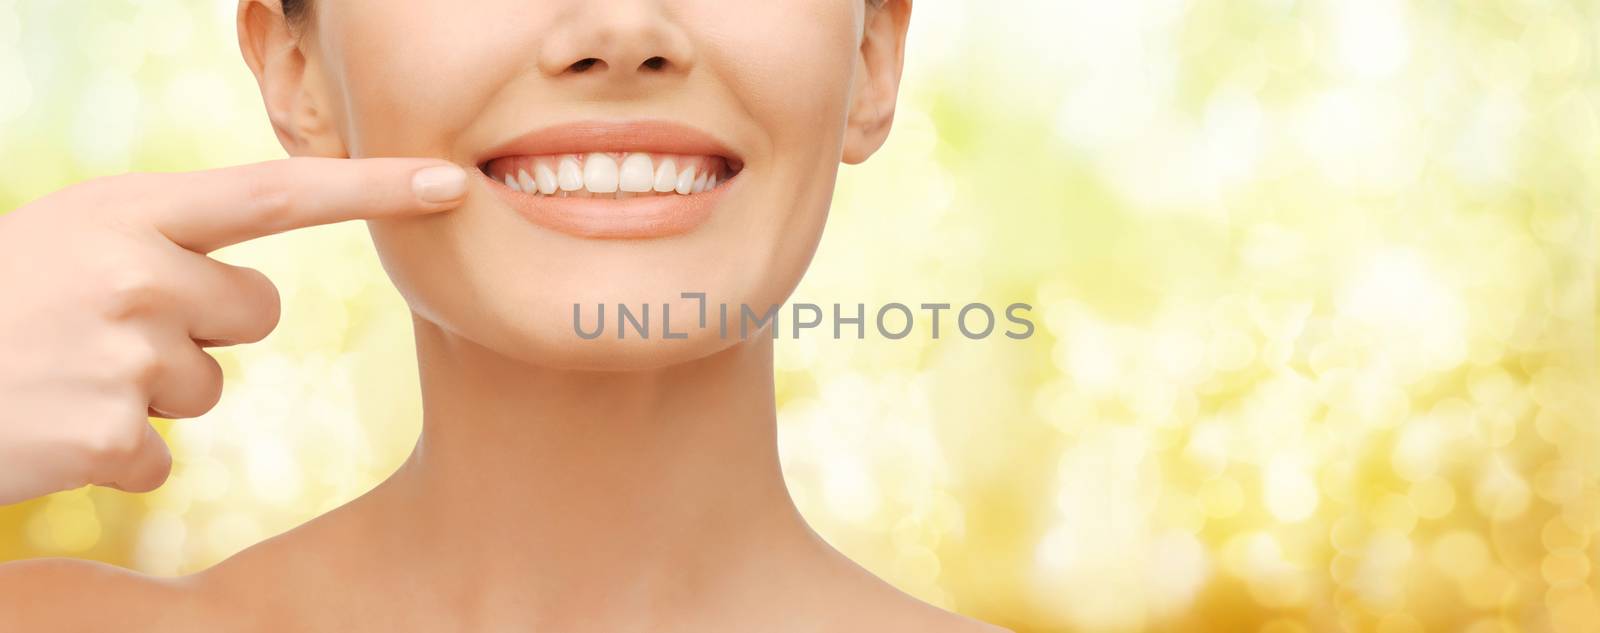 beauty and dental health concept - closeup picture of beautiful woman pointing finger to her teeth